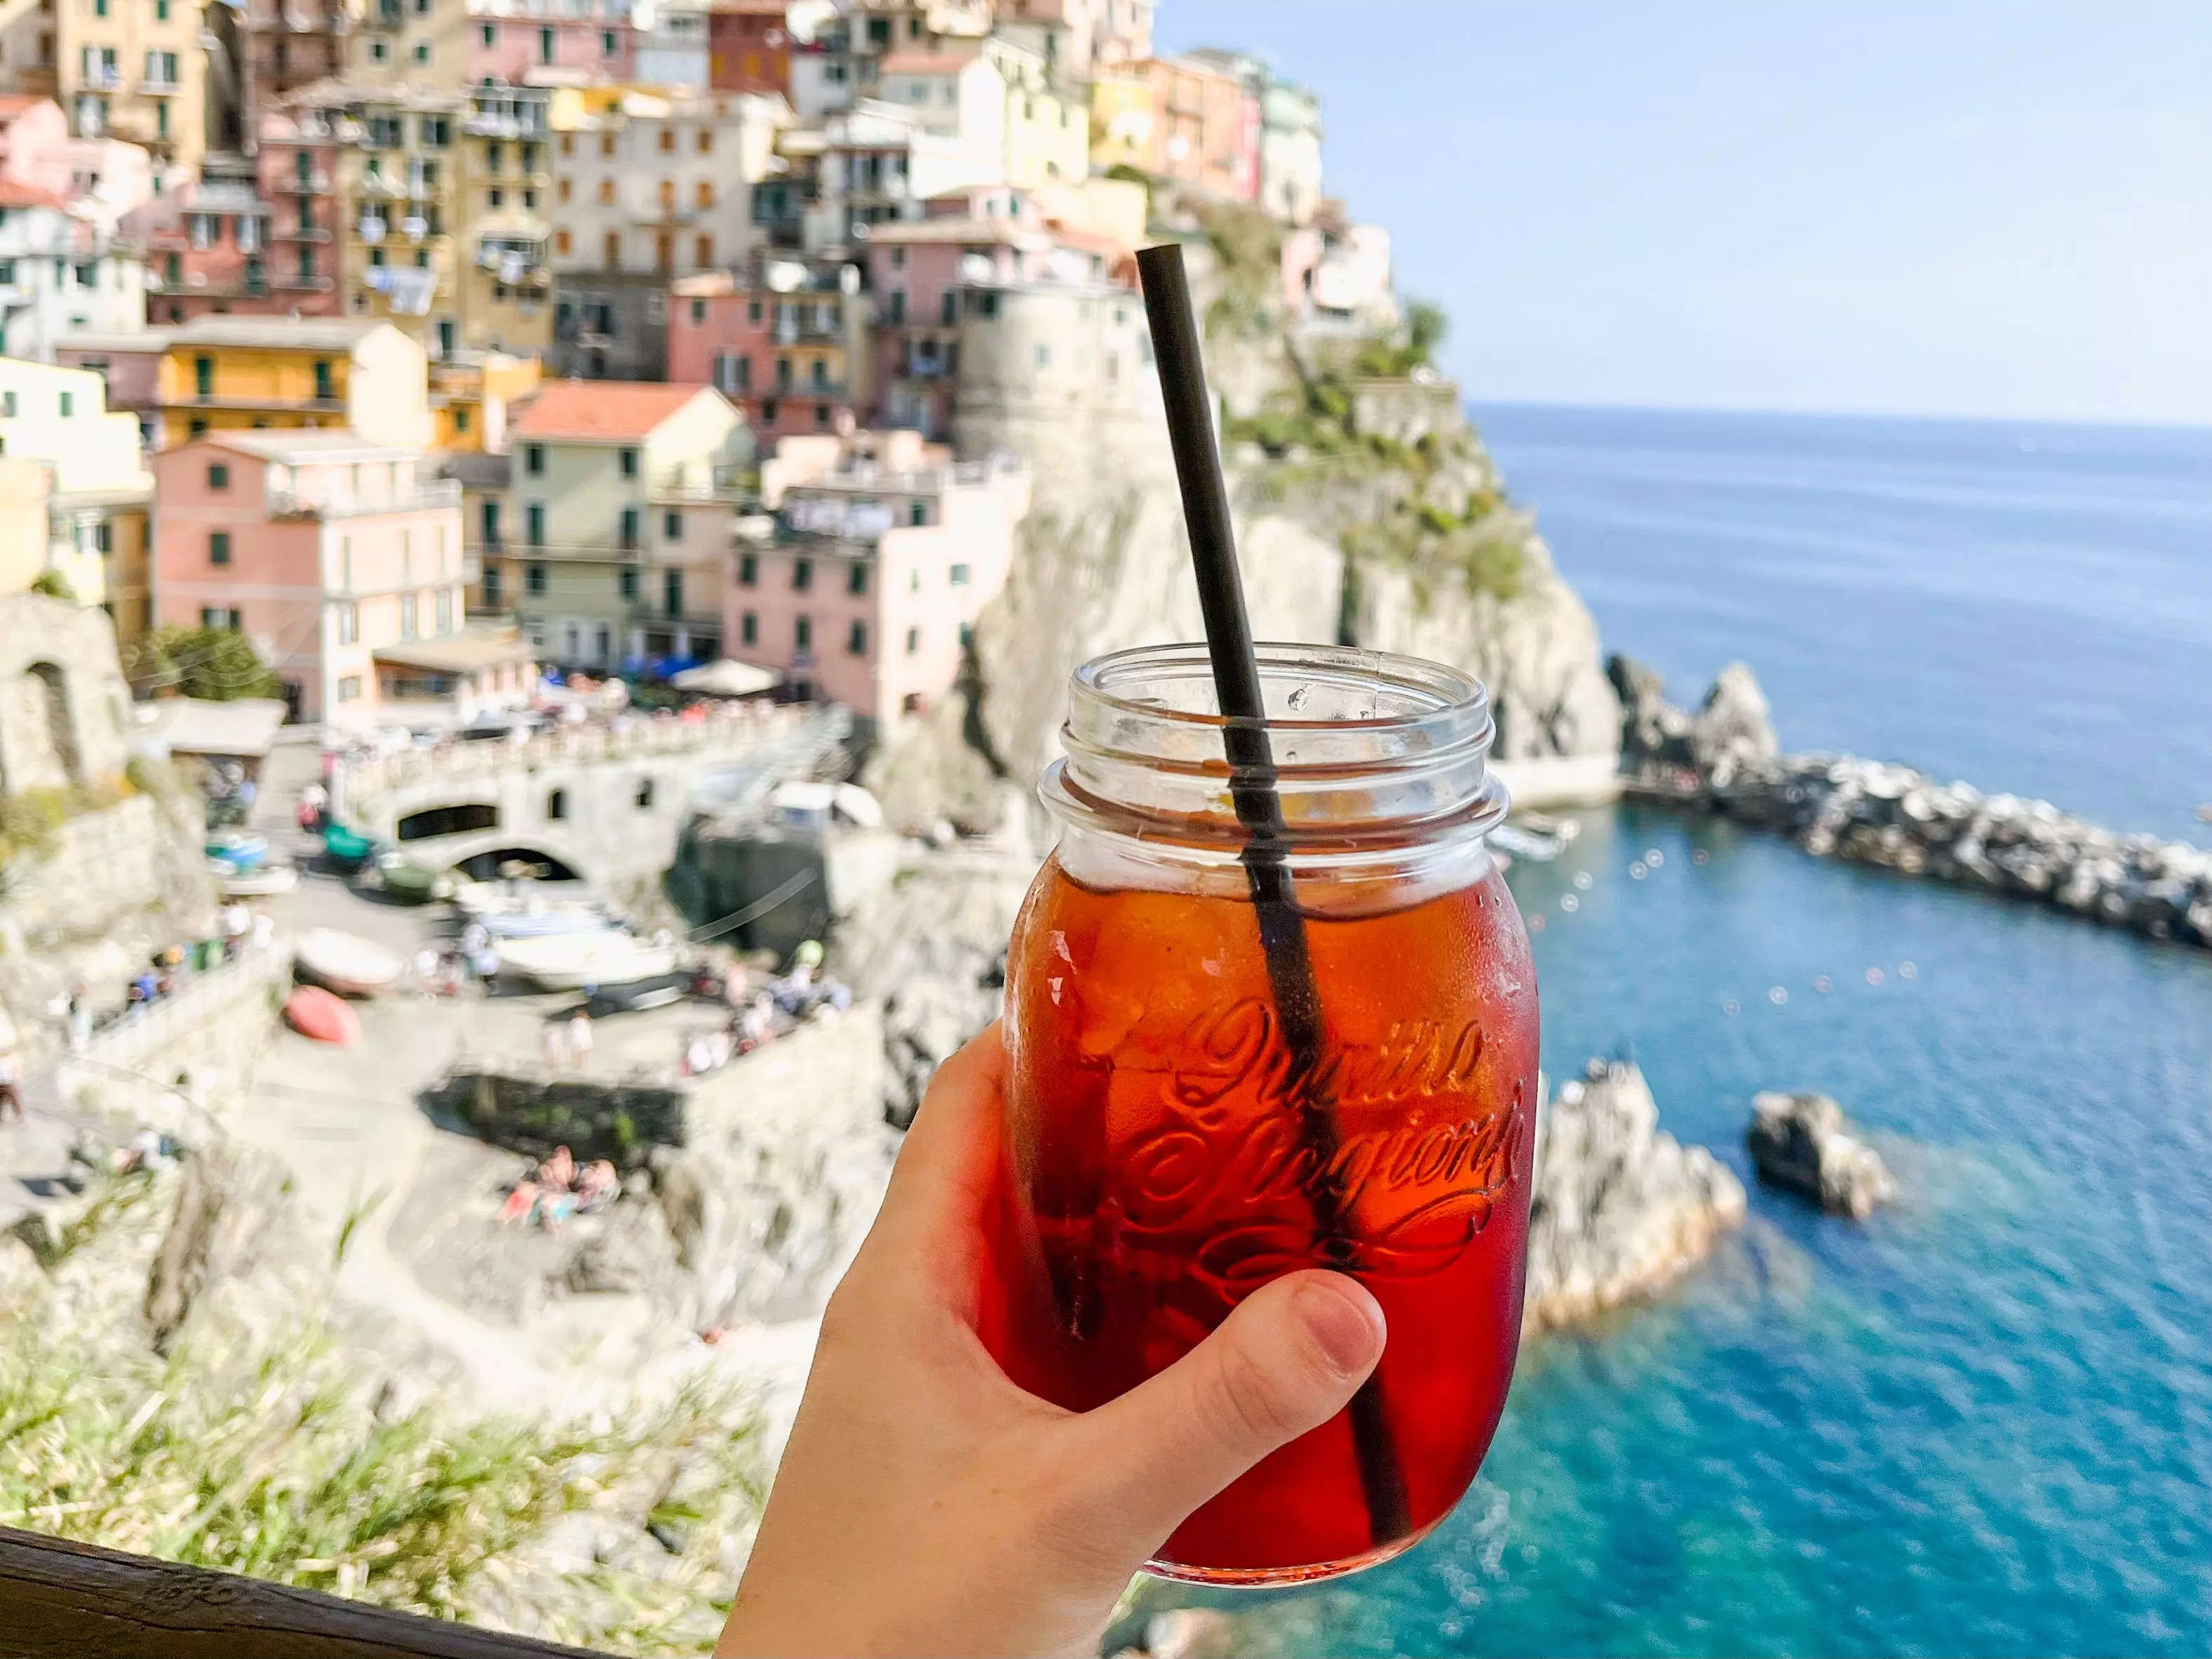 The author holds an Americano cocktail in front of a colorful Italian town by the water.